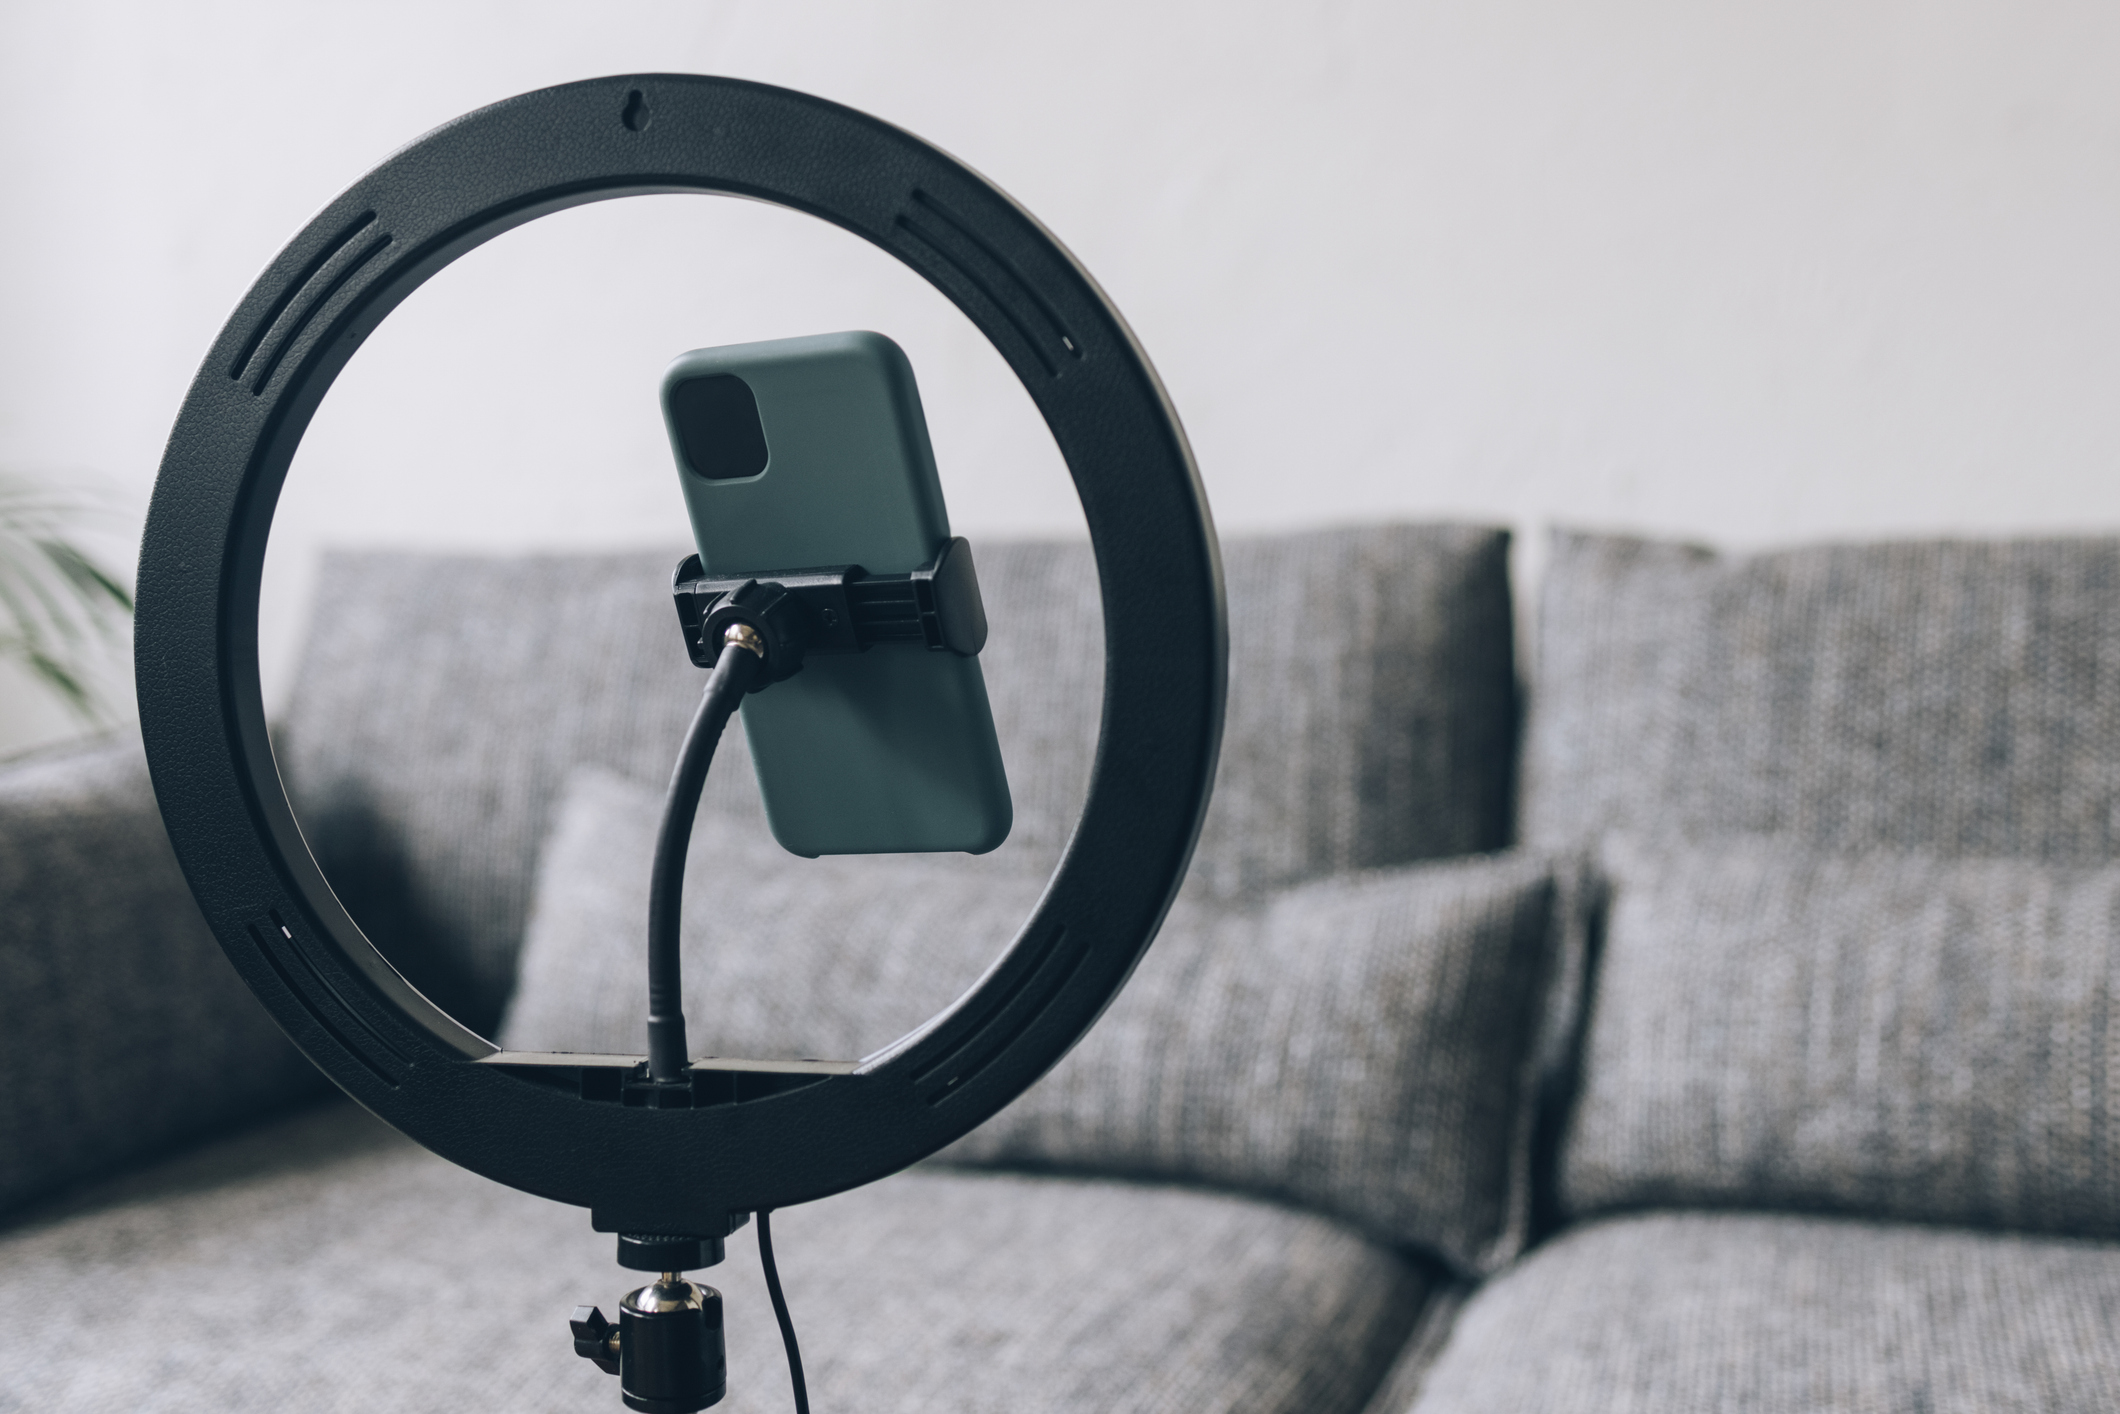 A cellphone on a stand with a ring light, set up in front of a couch.